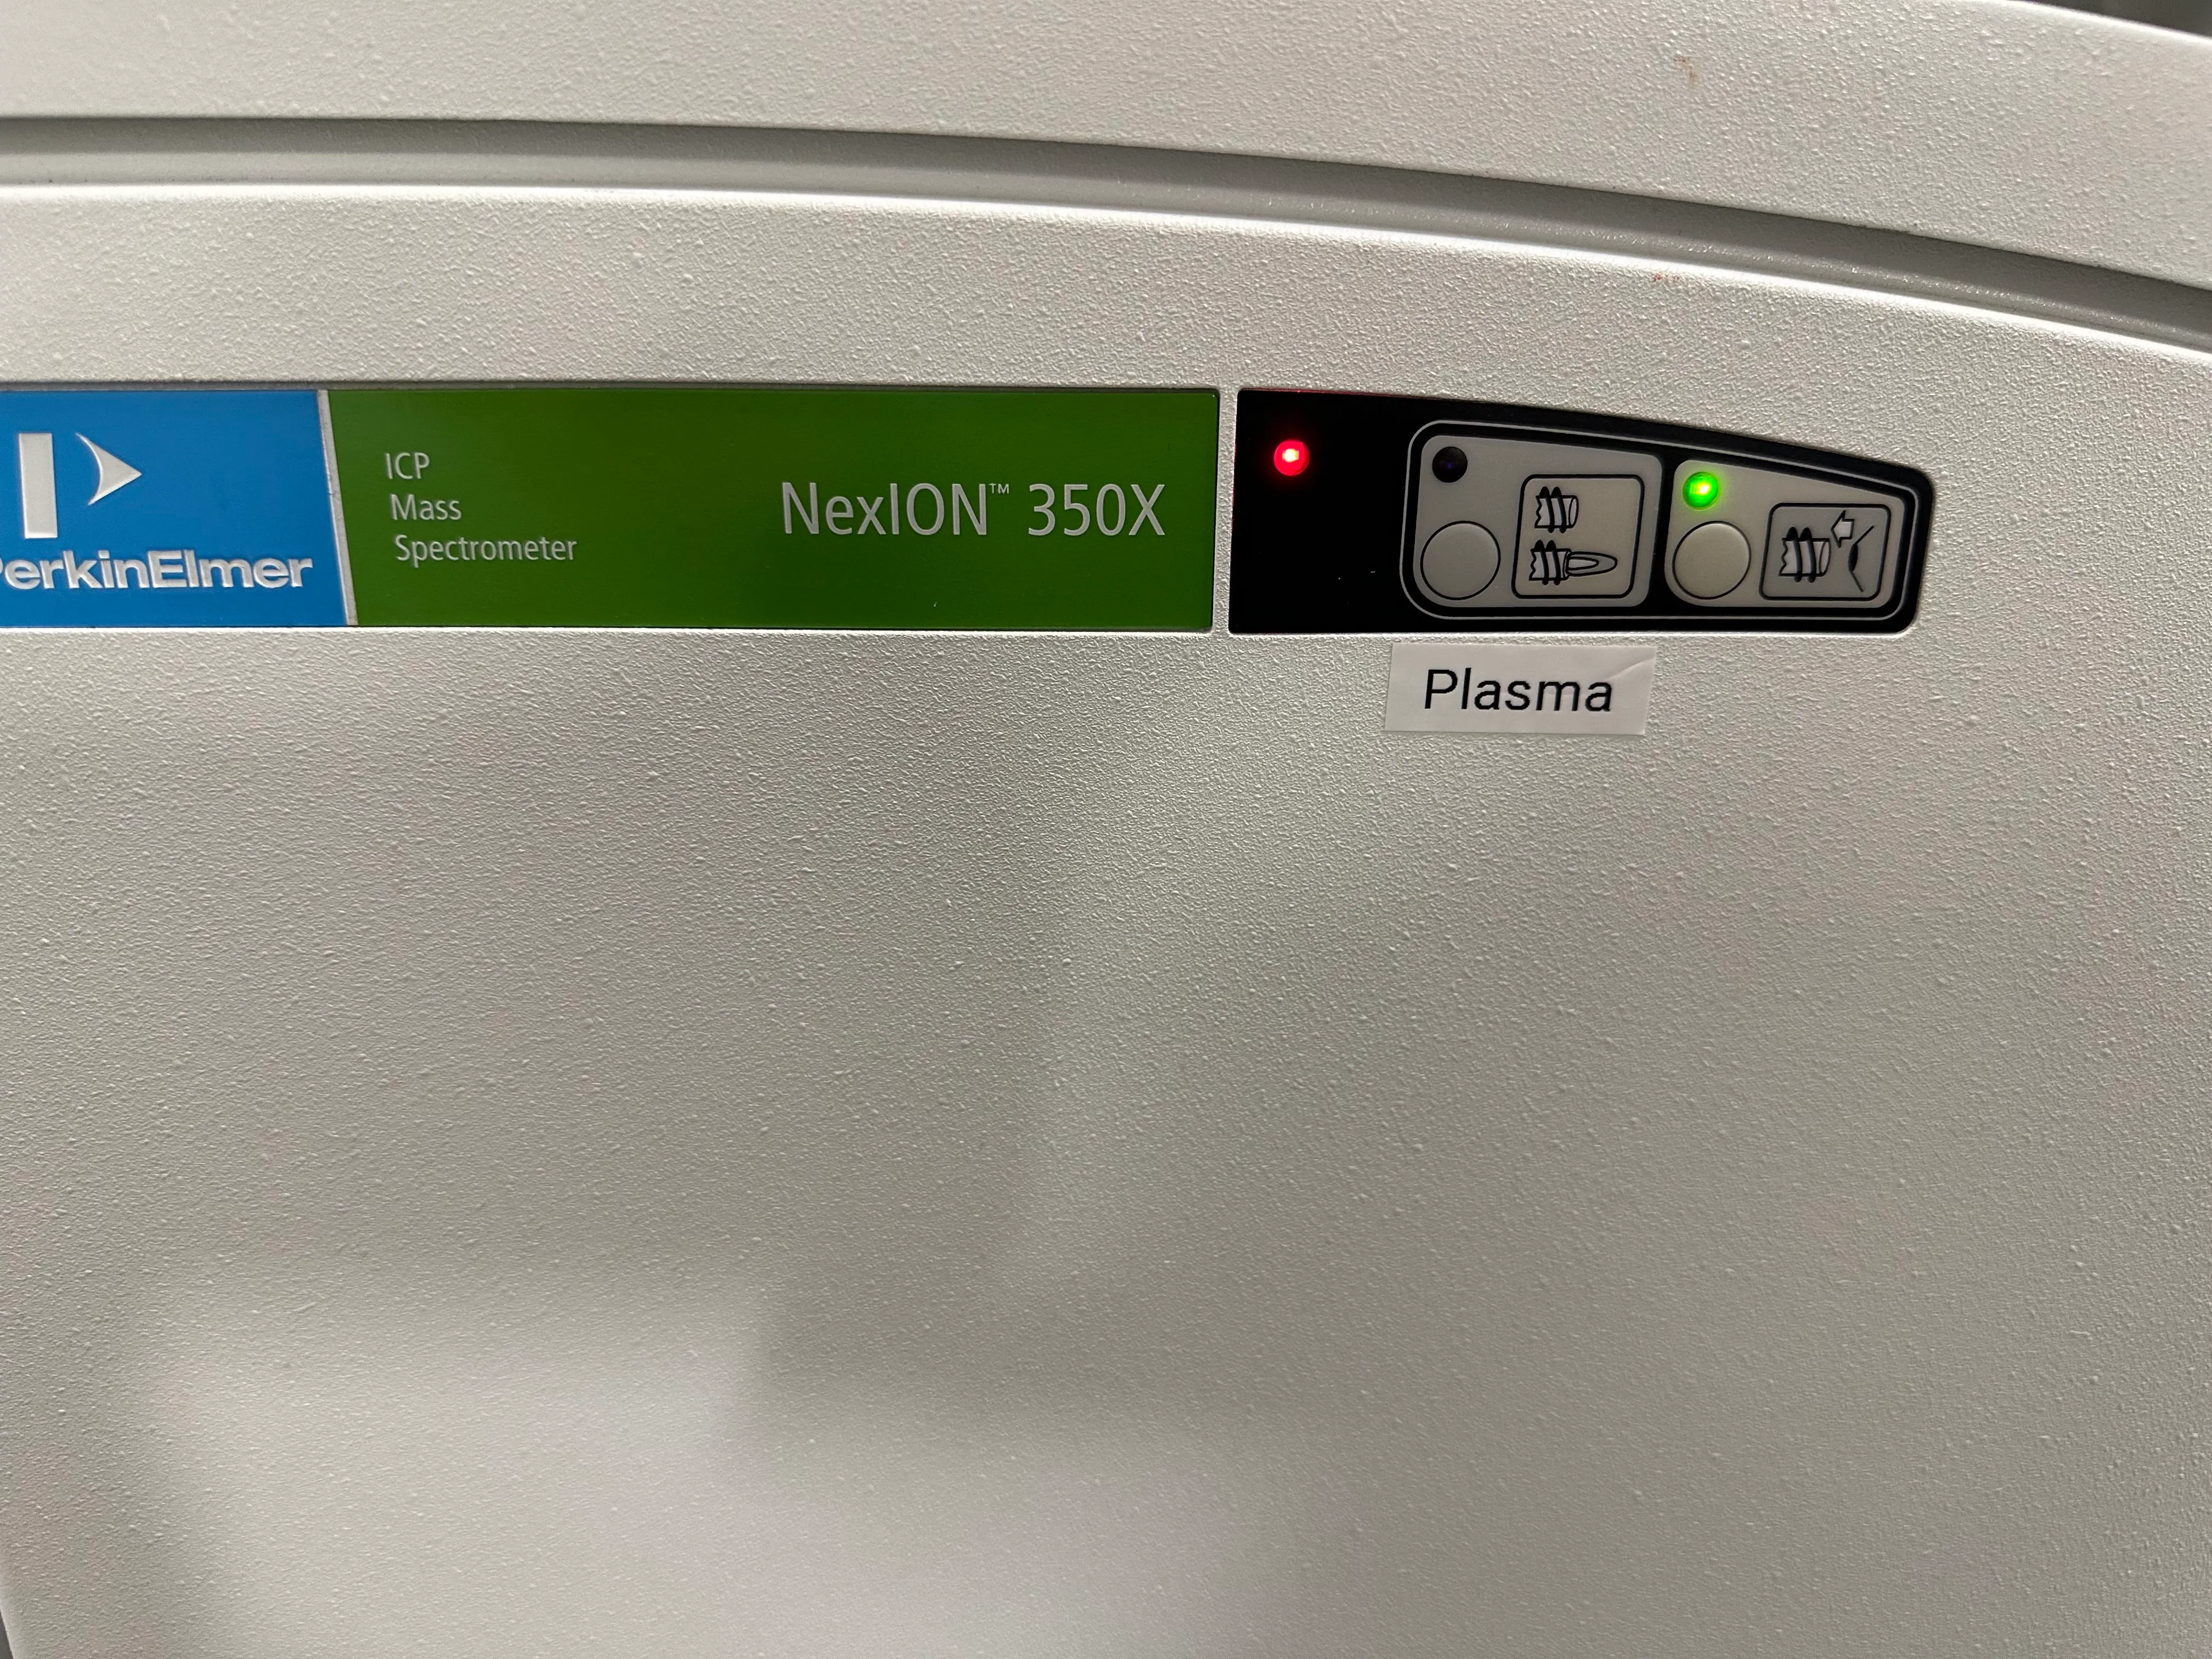 PerkinElmer ICP-MS Nexion 350X with autosampler, computer and software